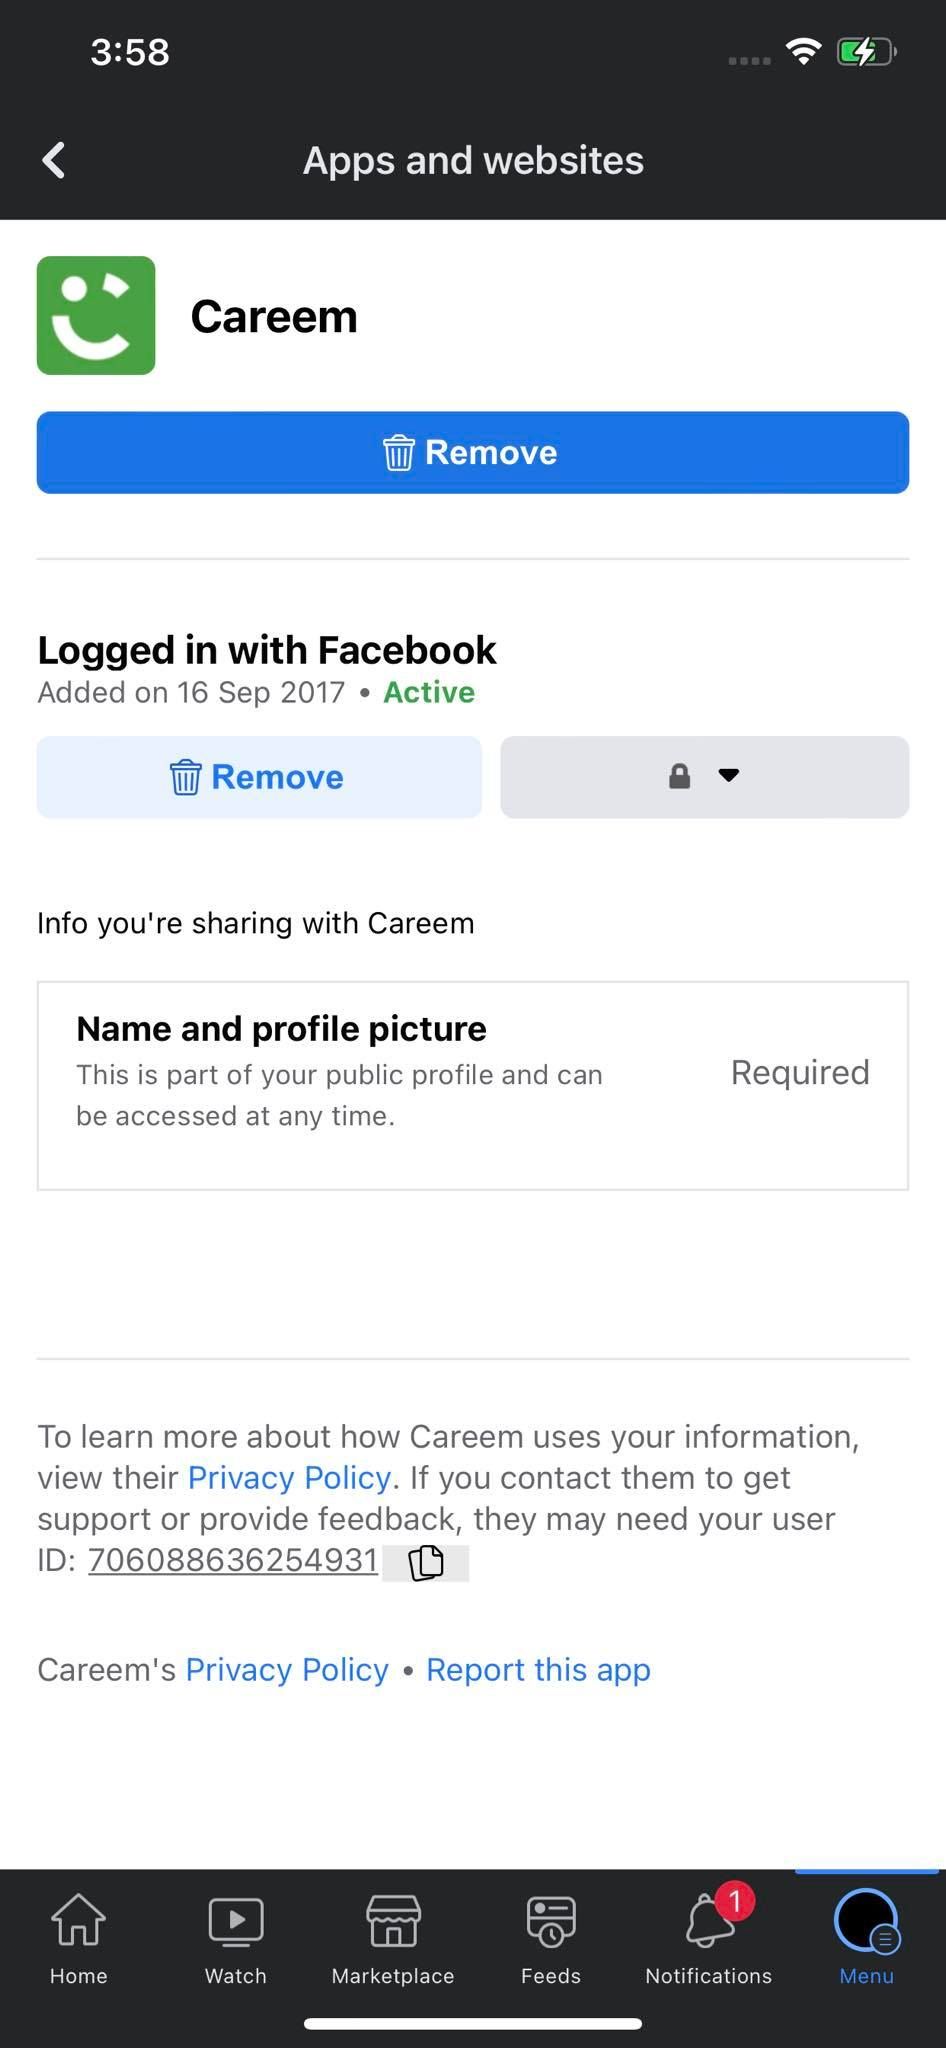 Unlinking Linked App to Our Facebook Account by Clicking on Remove Button Next in Settings of Facebook for iOS